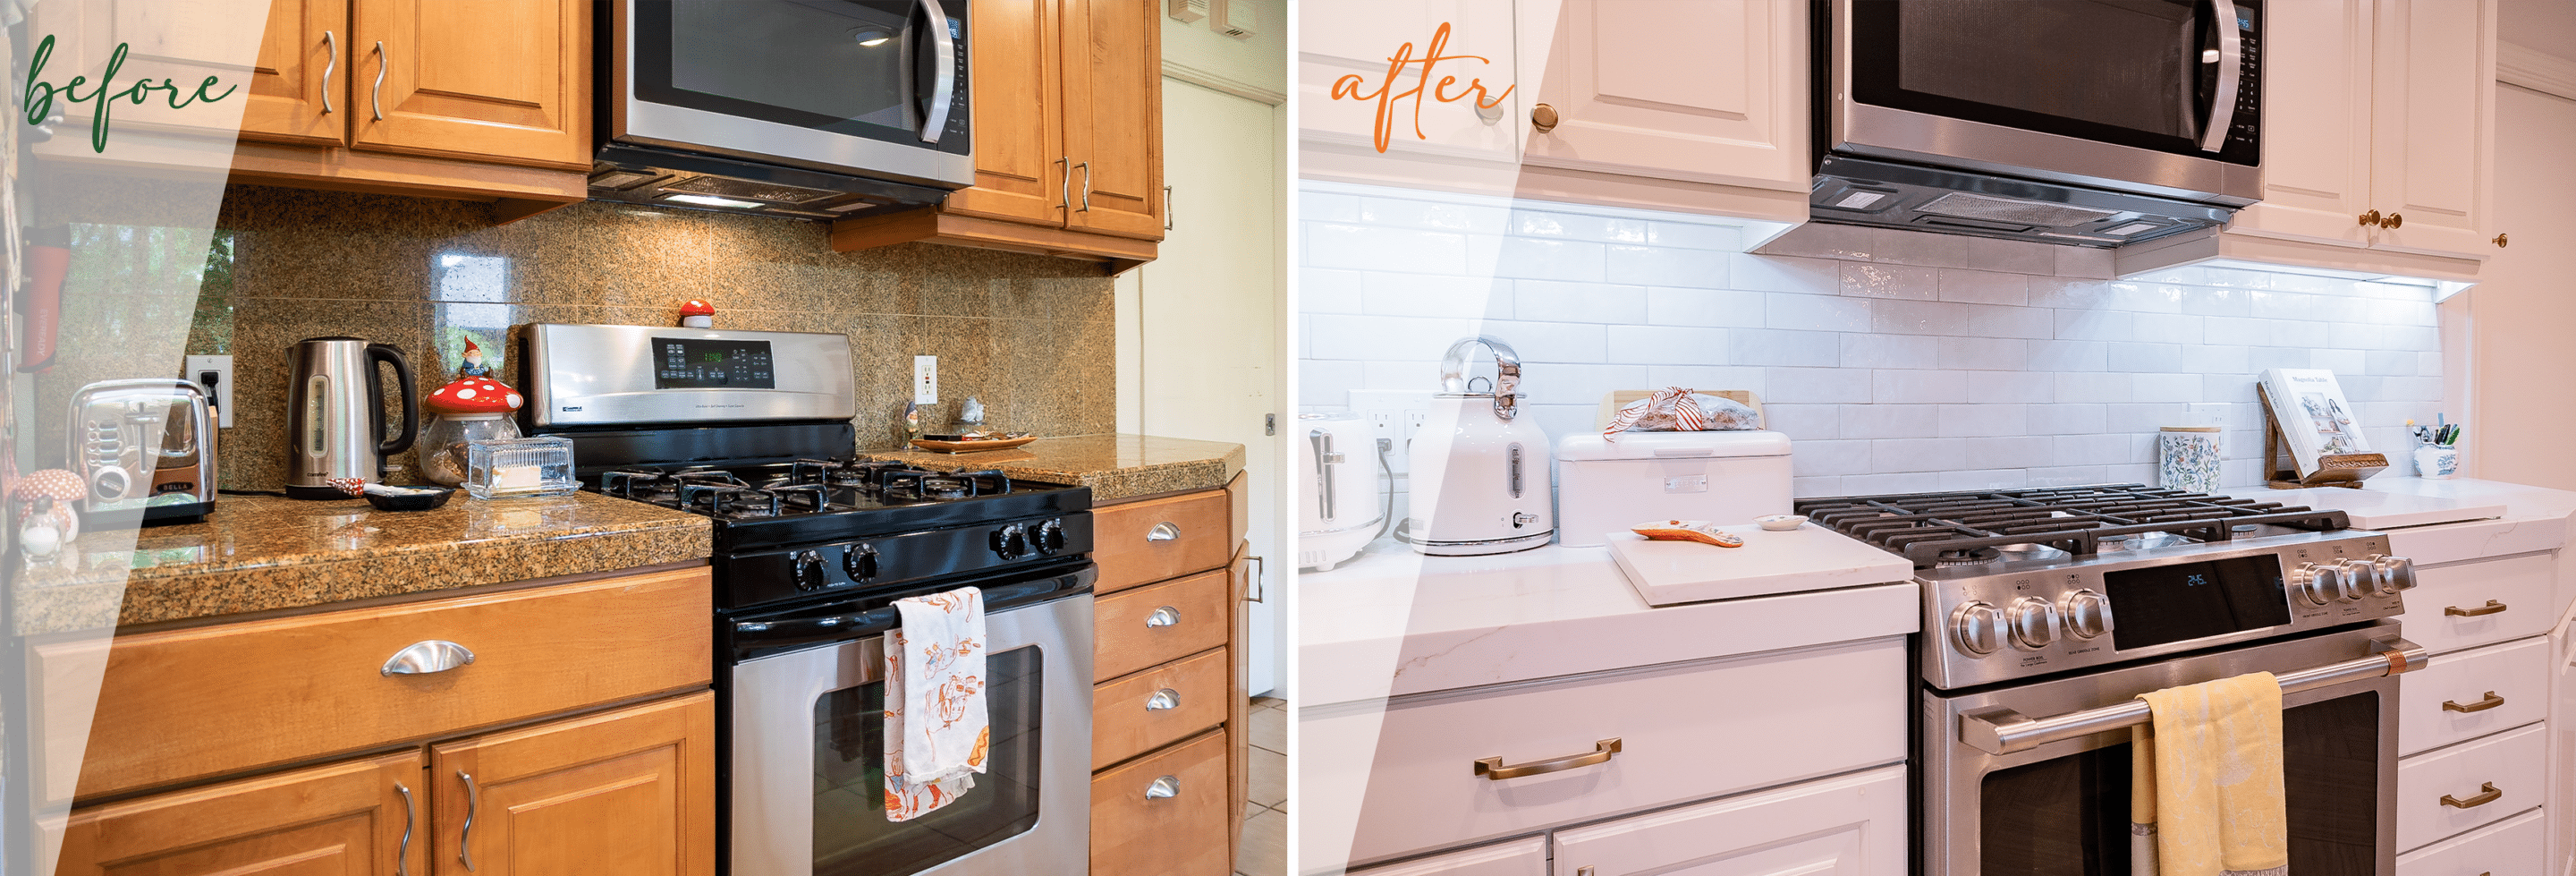 Before & After Kitchen Remodel 